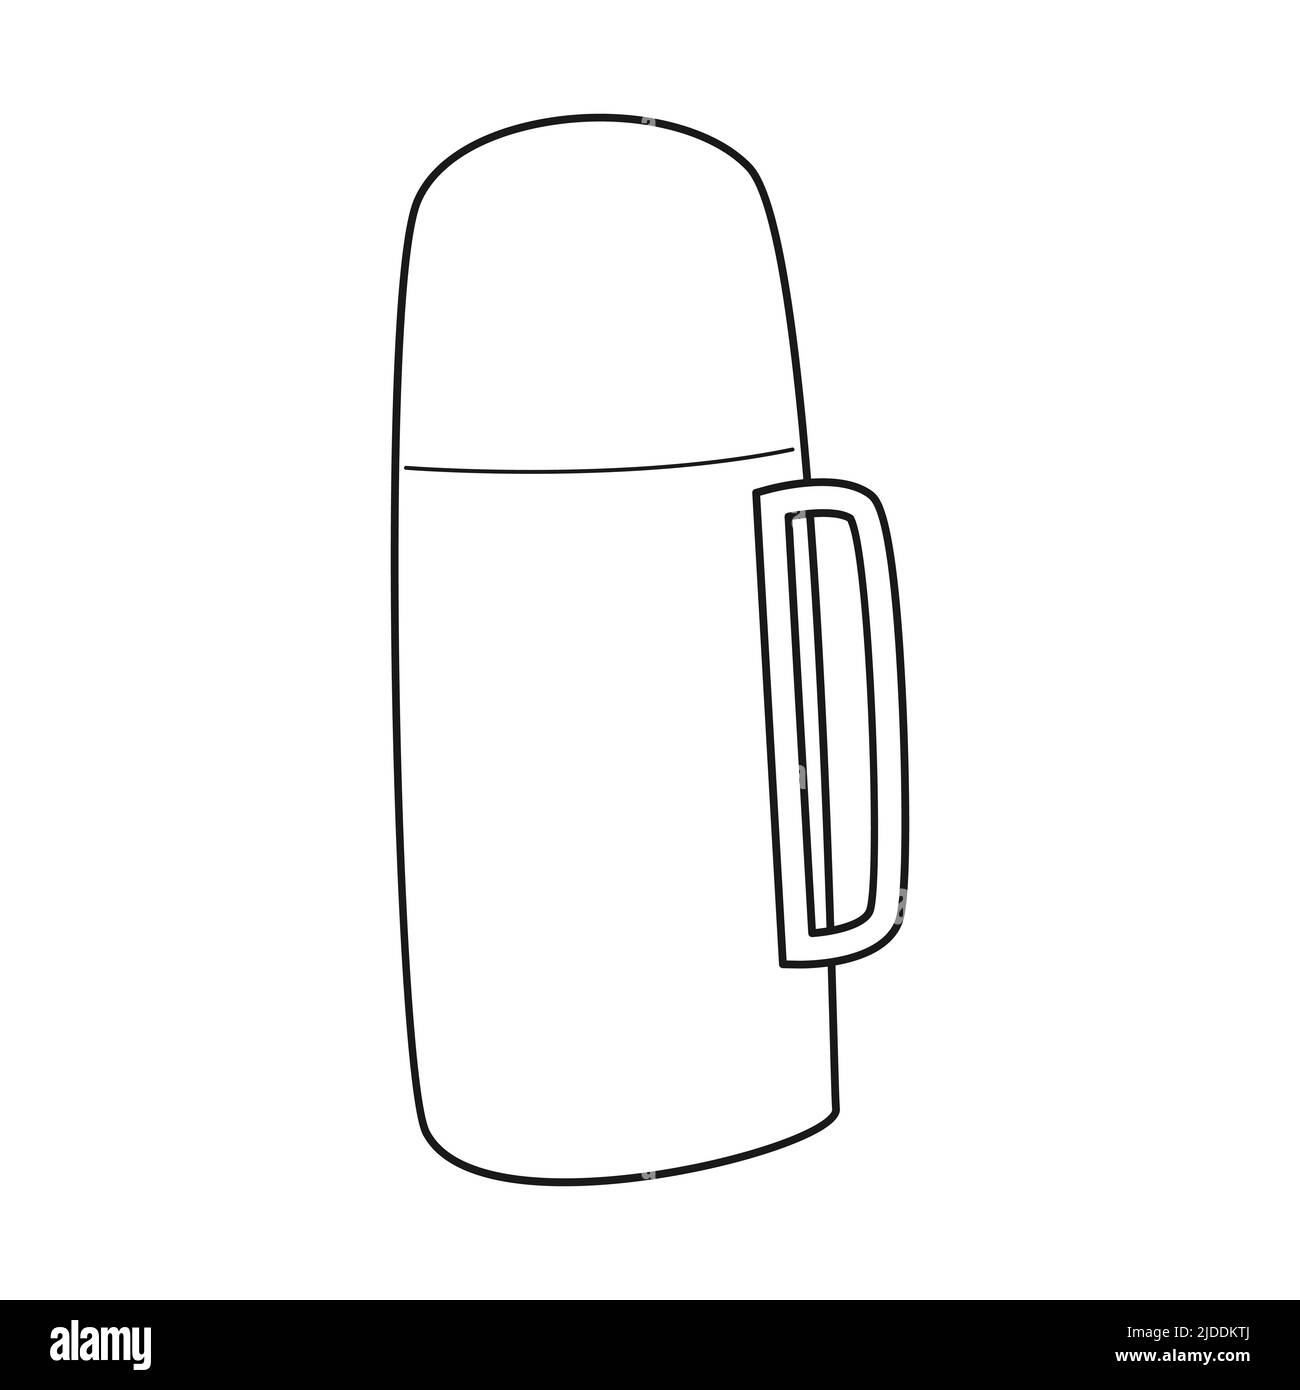 Thermos Vector Vacuum Flask Or Bottle With Hot Drink Coffee Or Tea  Illustration Set Of Metal Bottled Container Or Aluminum Mug Isolated On  White Background Stock Illustration - Download Image Now - iStock